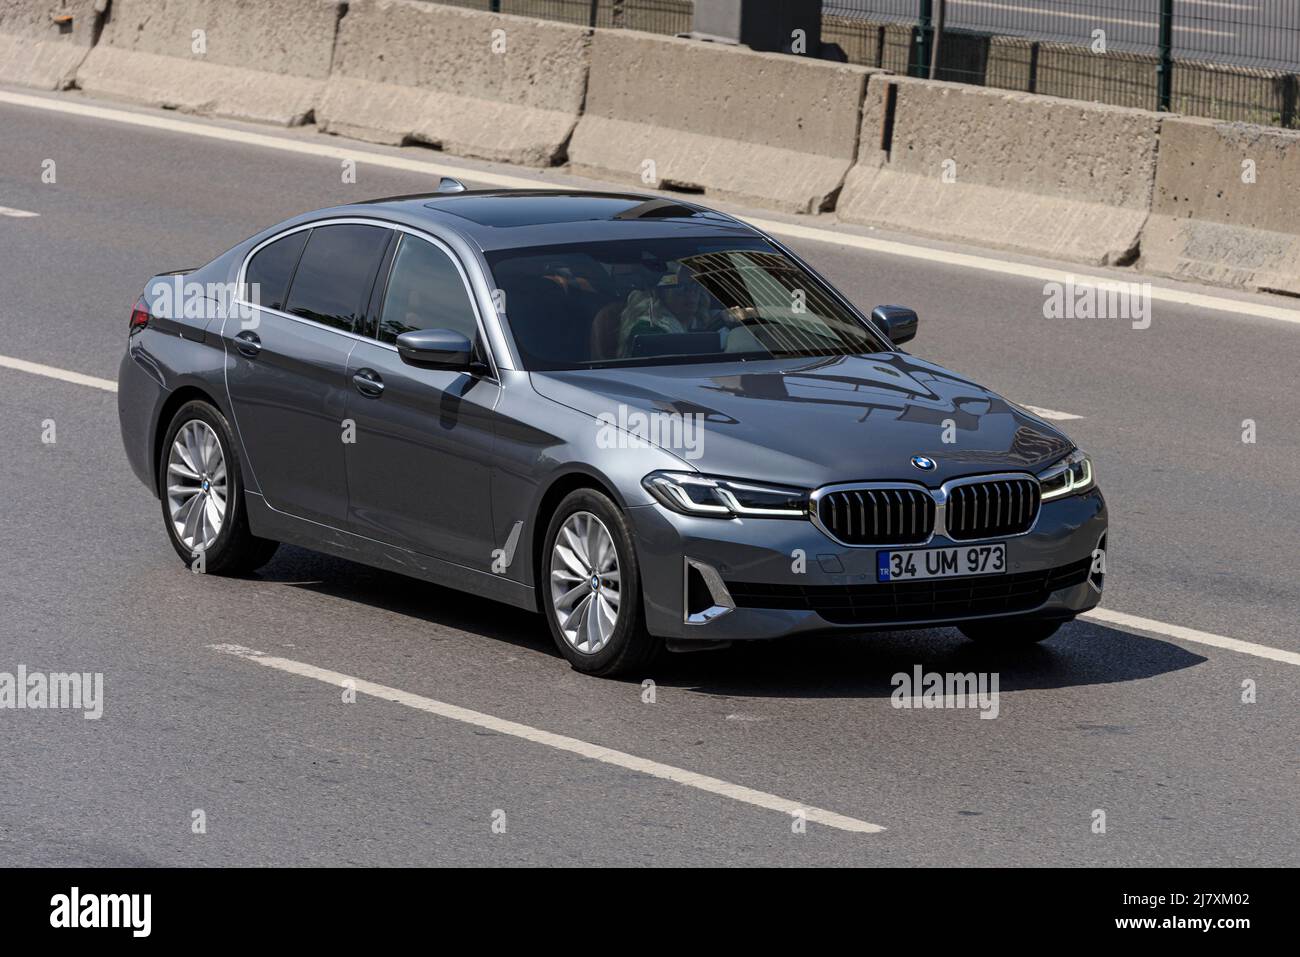 ISTANBUL, TURKEY - APRIL 19, 2022: BMW 520 is a range of executive cars manufactured by German automaker BMW in various engine and body configurations Stock Photo